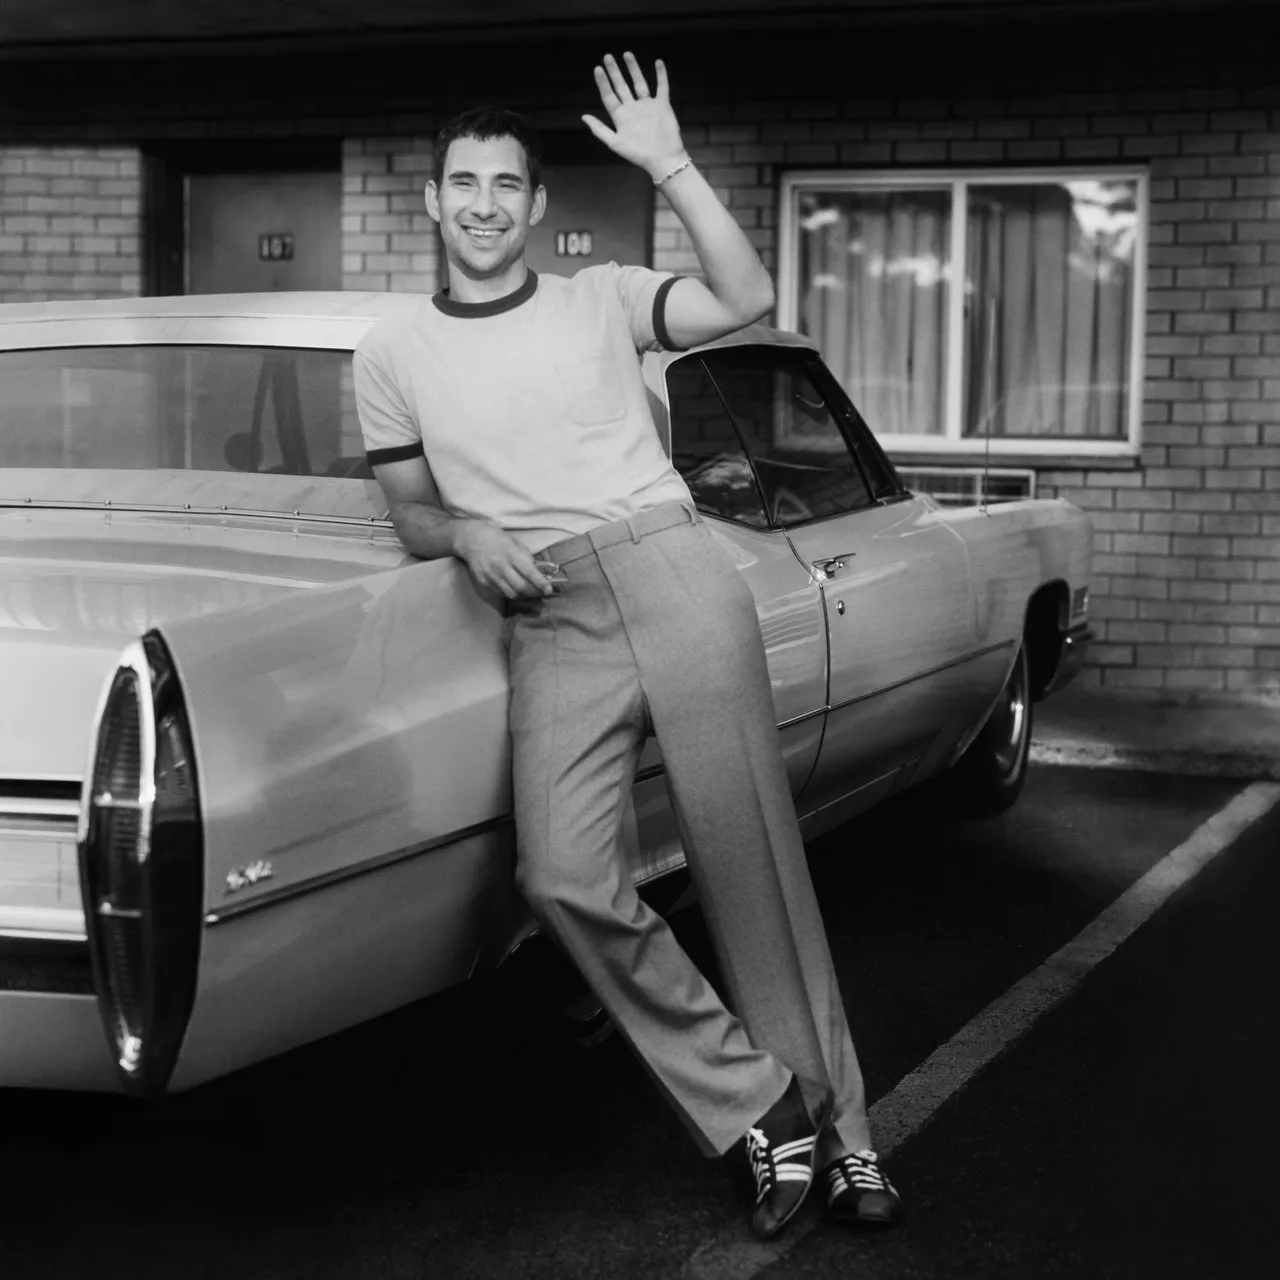 Bleachers' album cover is a man leaning against a car in black and white.